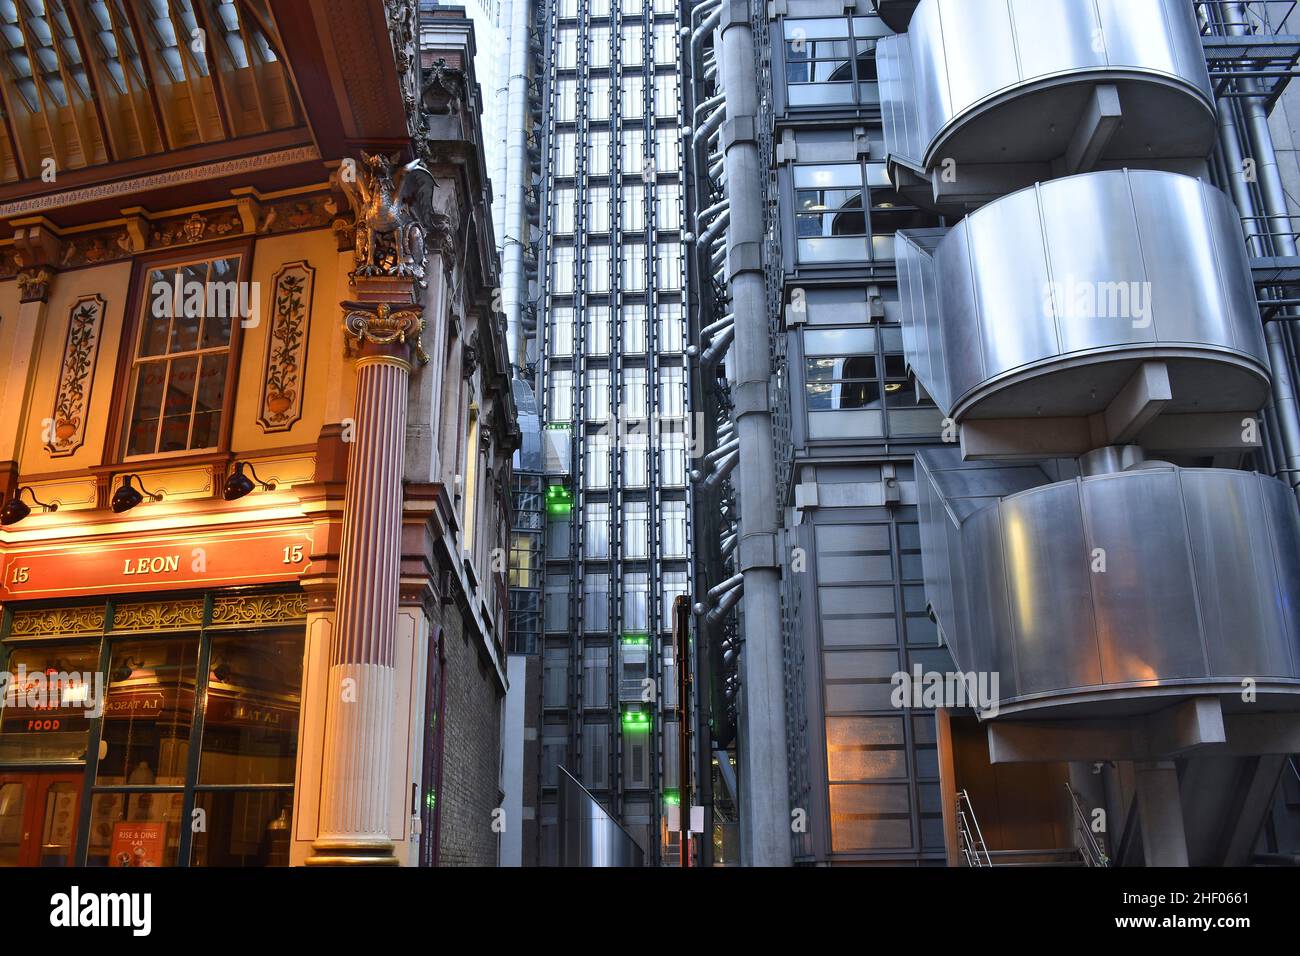 Leadenhall Market and Lloyd's Building, traditional and modern architecture styles, City of London UK. Stock Photo